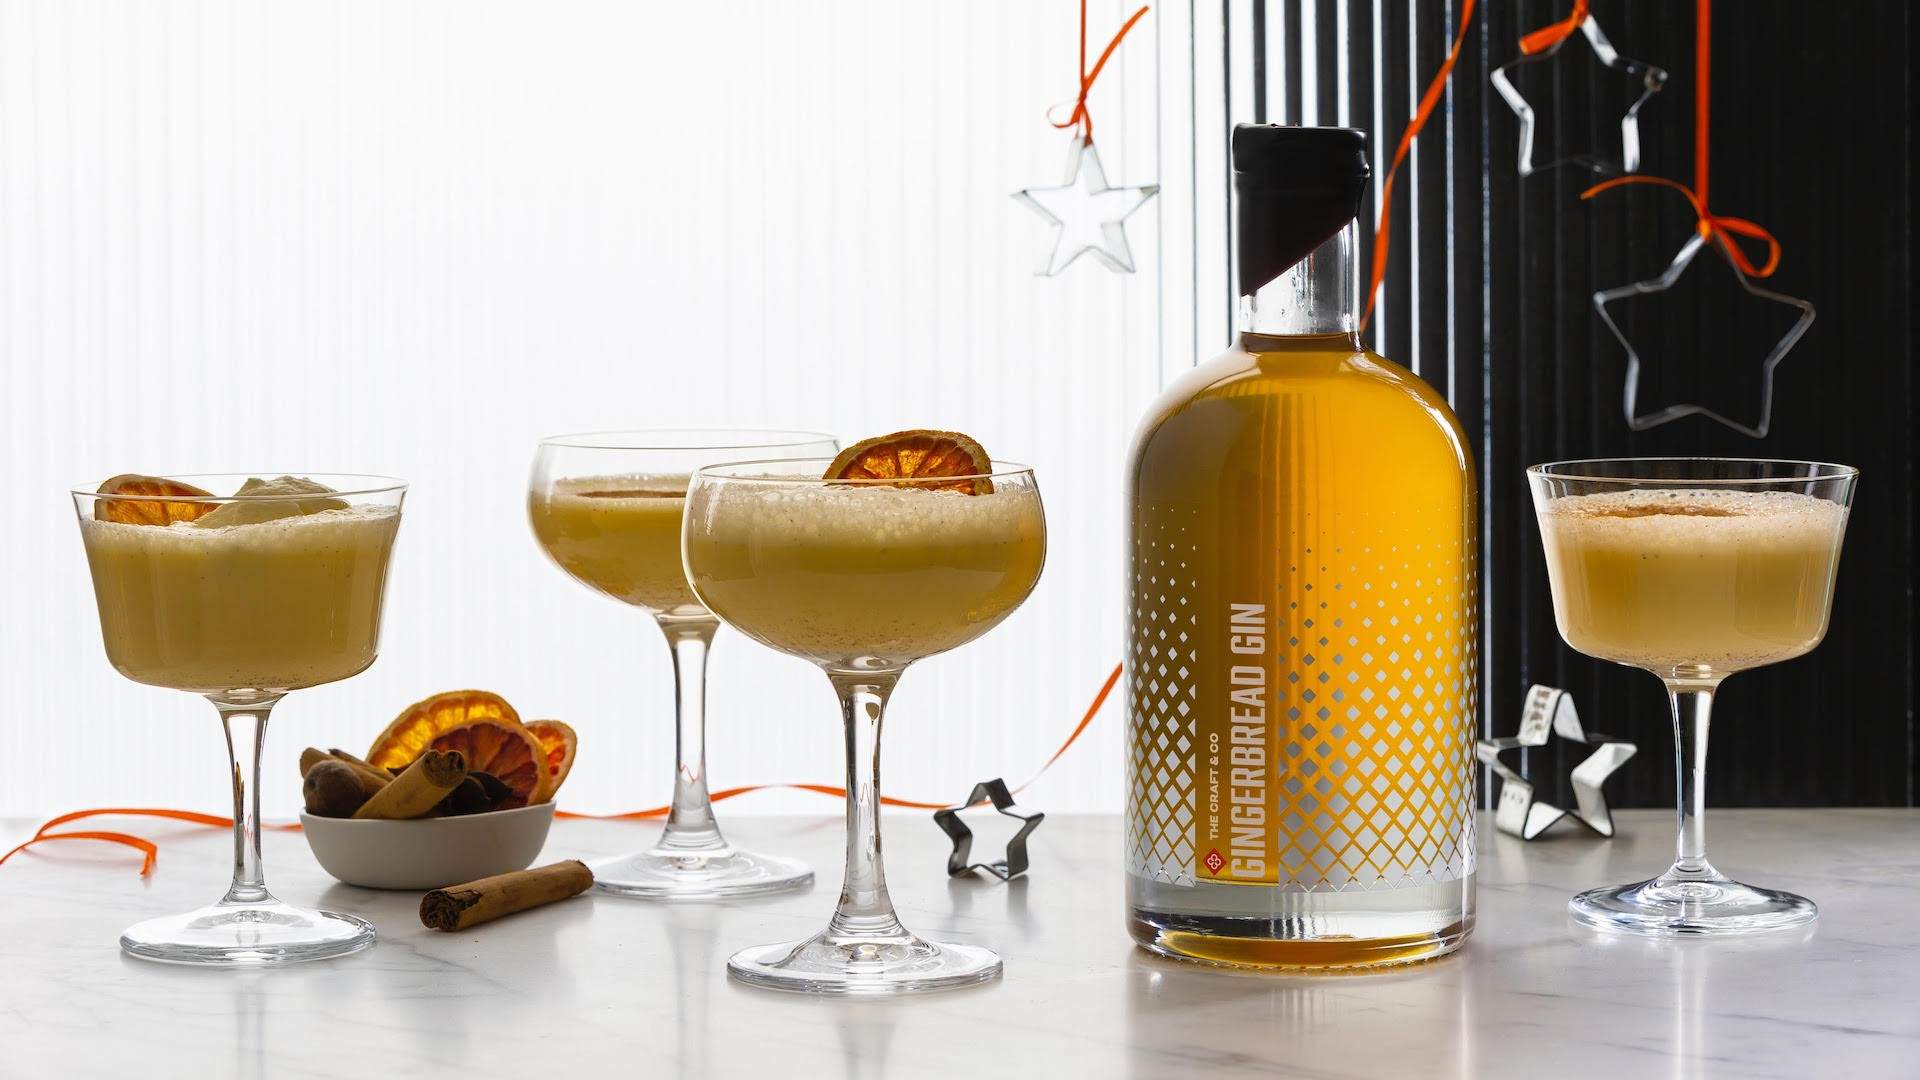 The Craft & Co Has Released Another Batch of Its Soul-Warming Gingerbread Gin